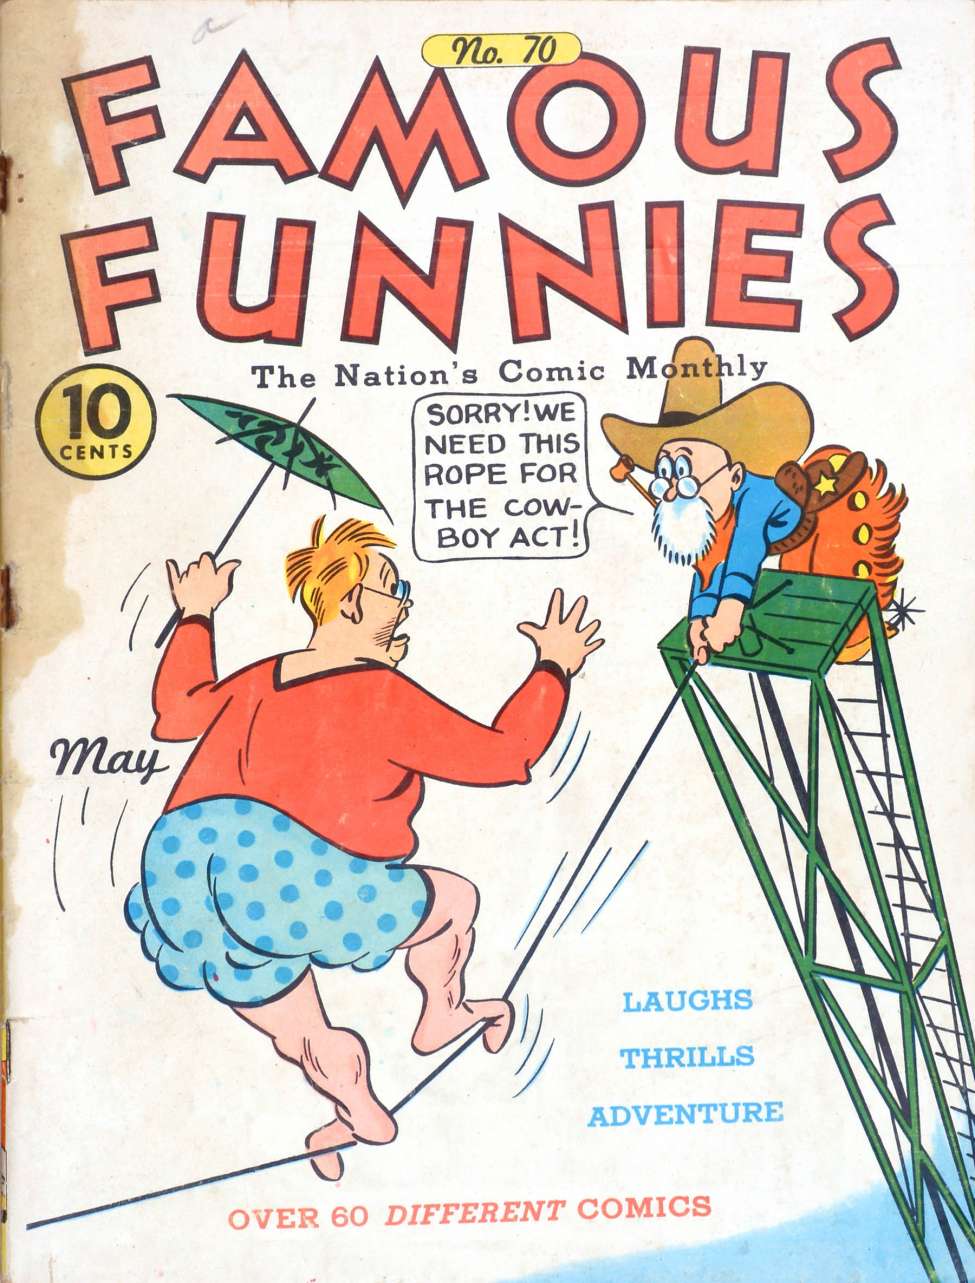 Book Cover For Famous Funnies 70